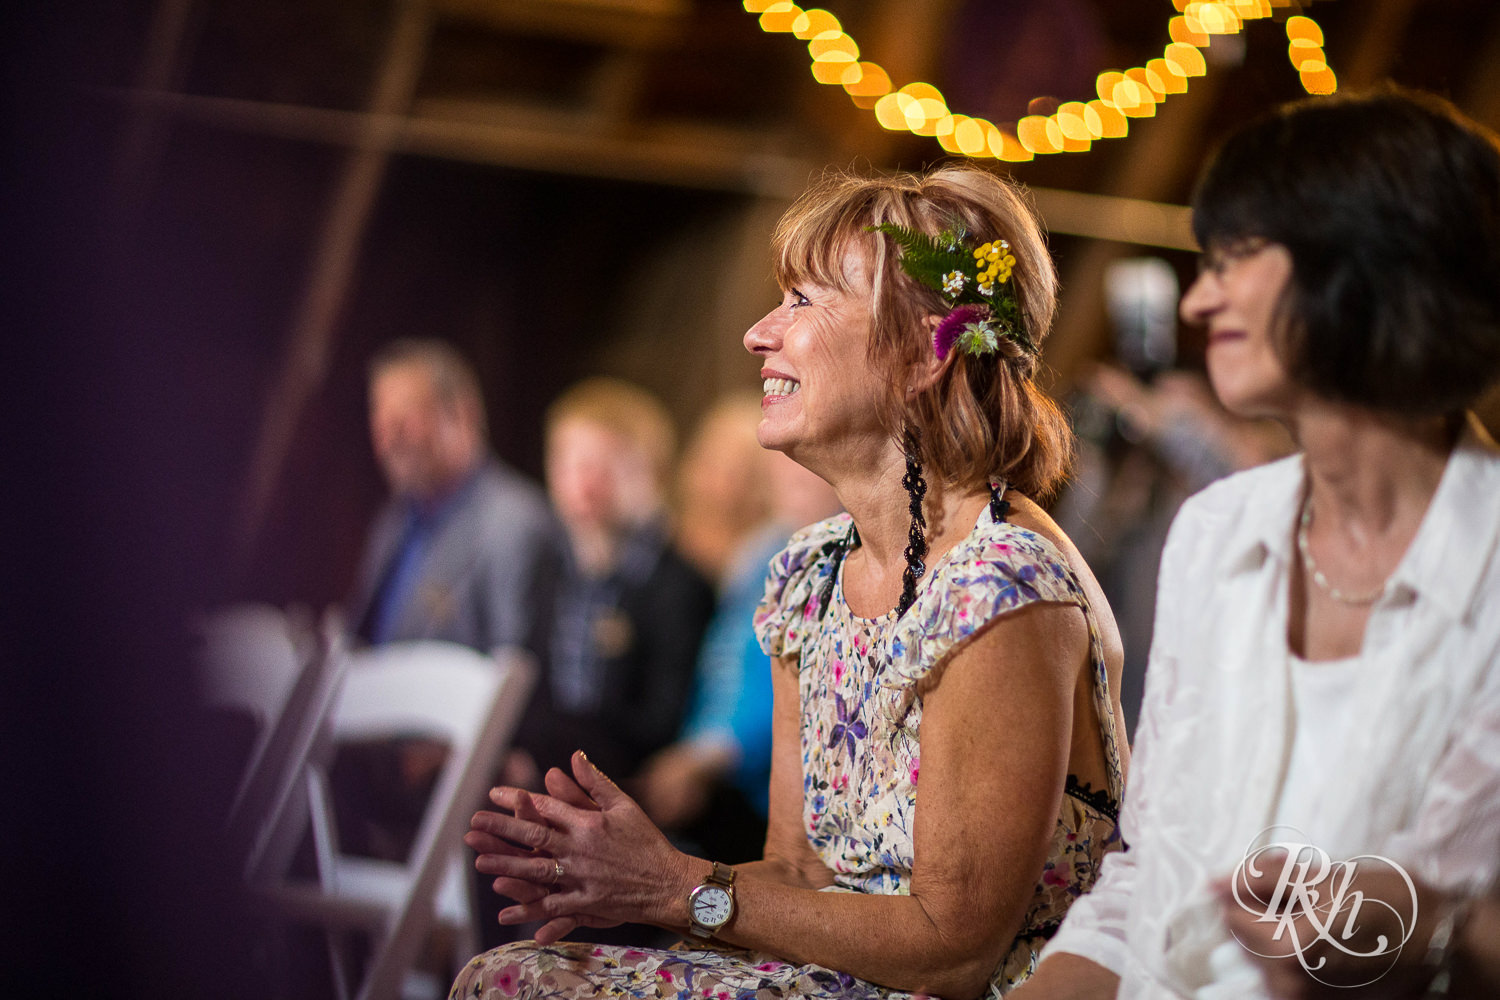 Mom smiles during wedding ceremony at Coops Event Barn in Dodge Center, Minnesota.